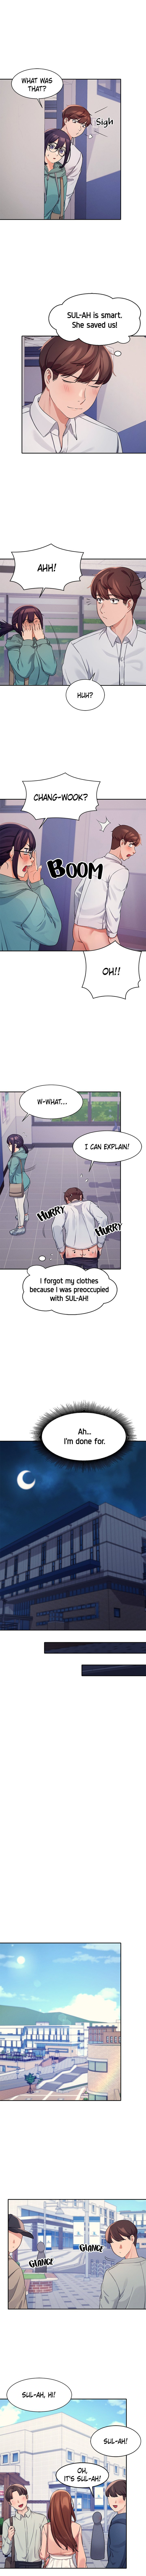 [OB, Overtime Sloth] Is There No Goddess in My College? Ch.16/? [English] [Manhwa PDF]